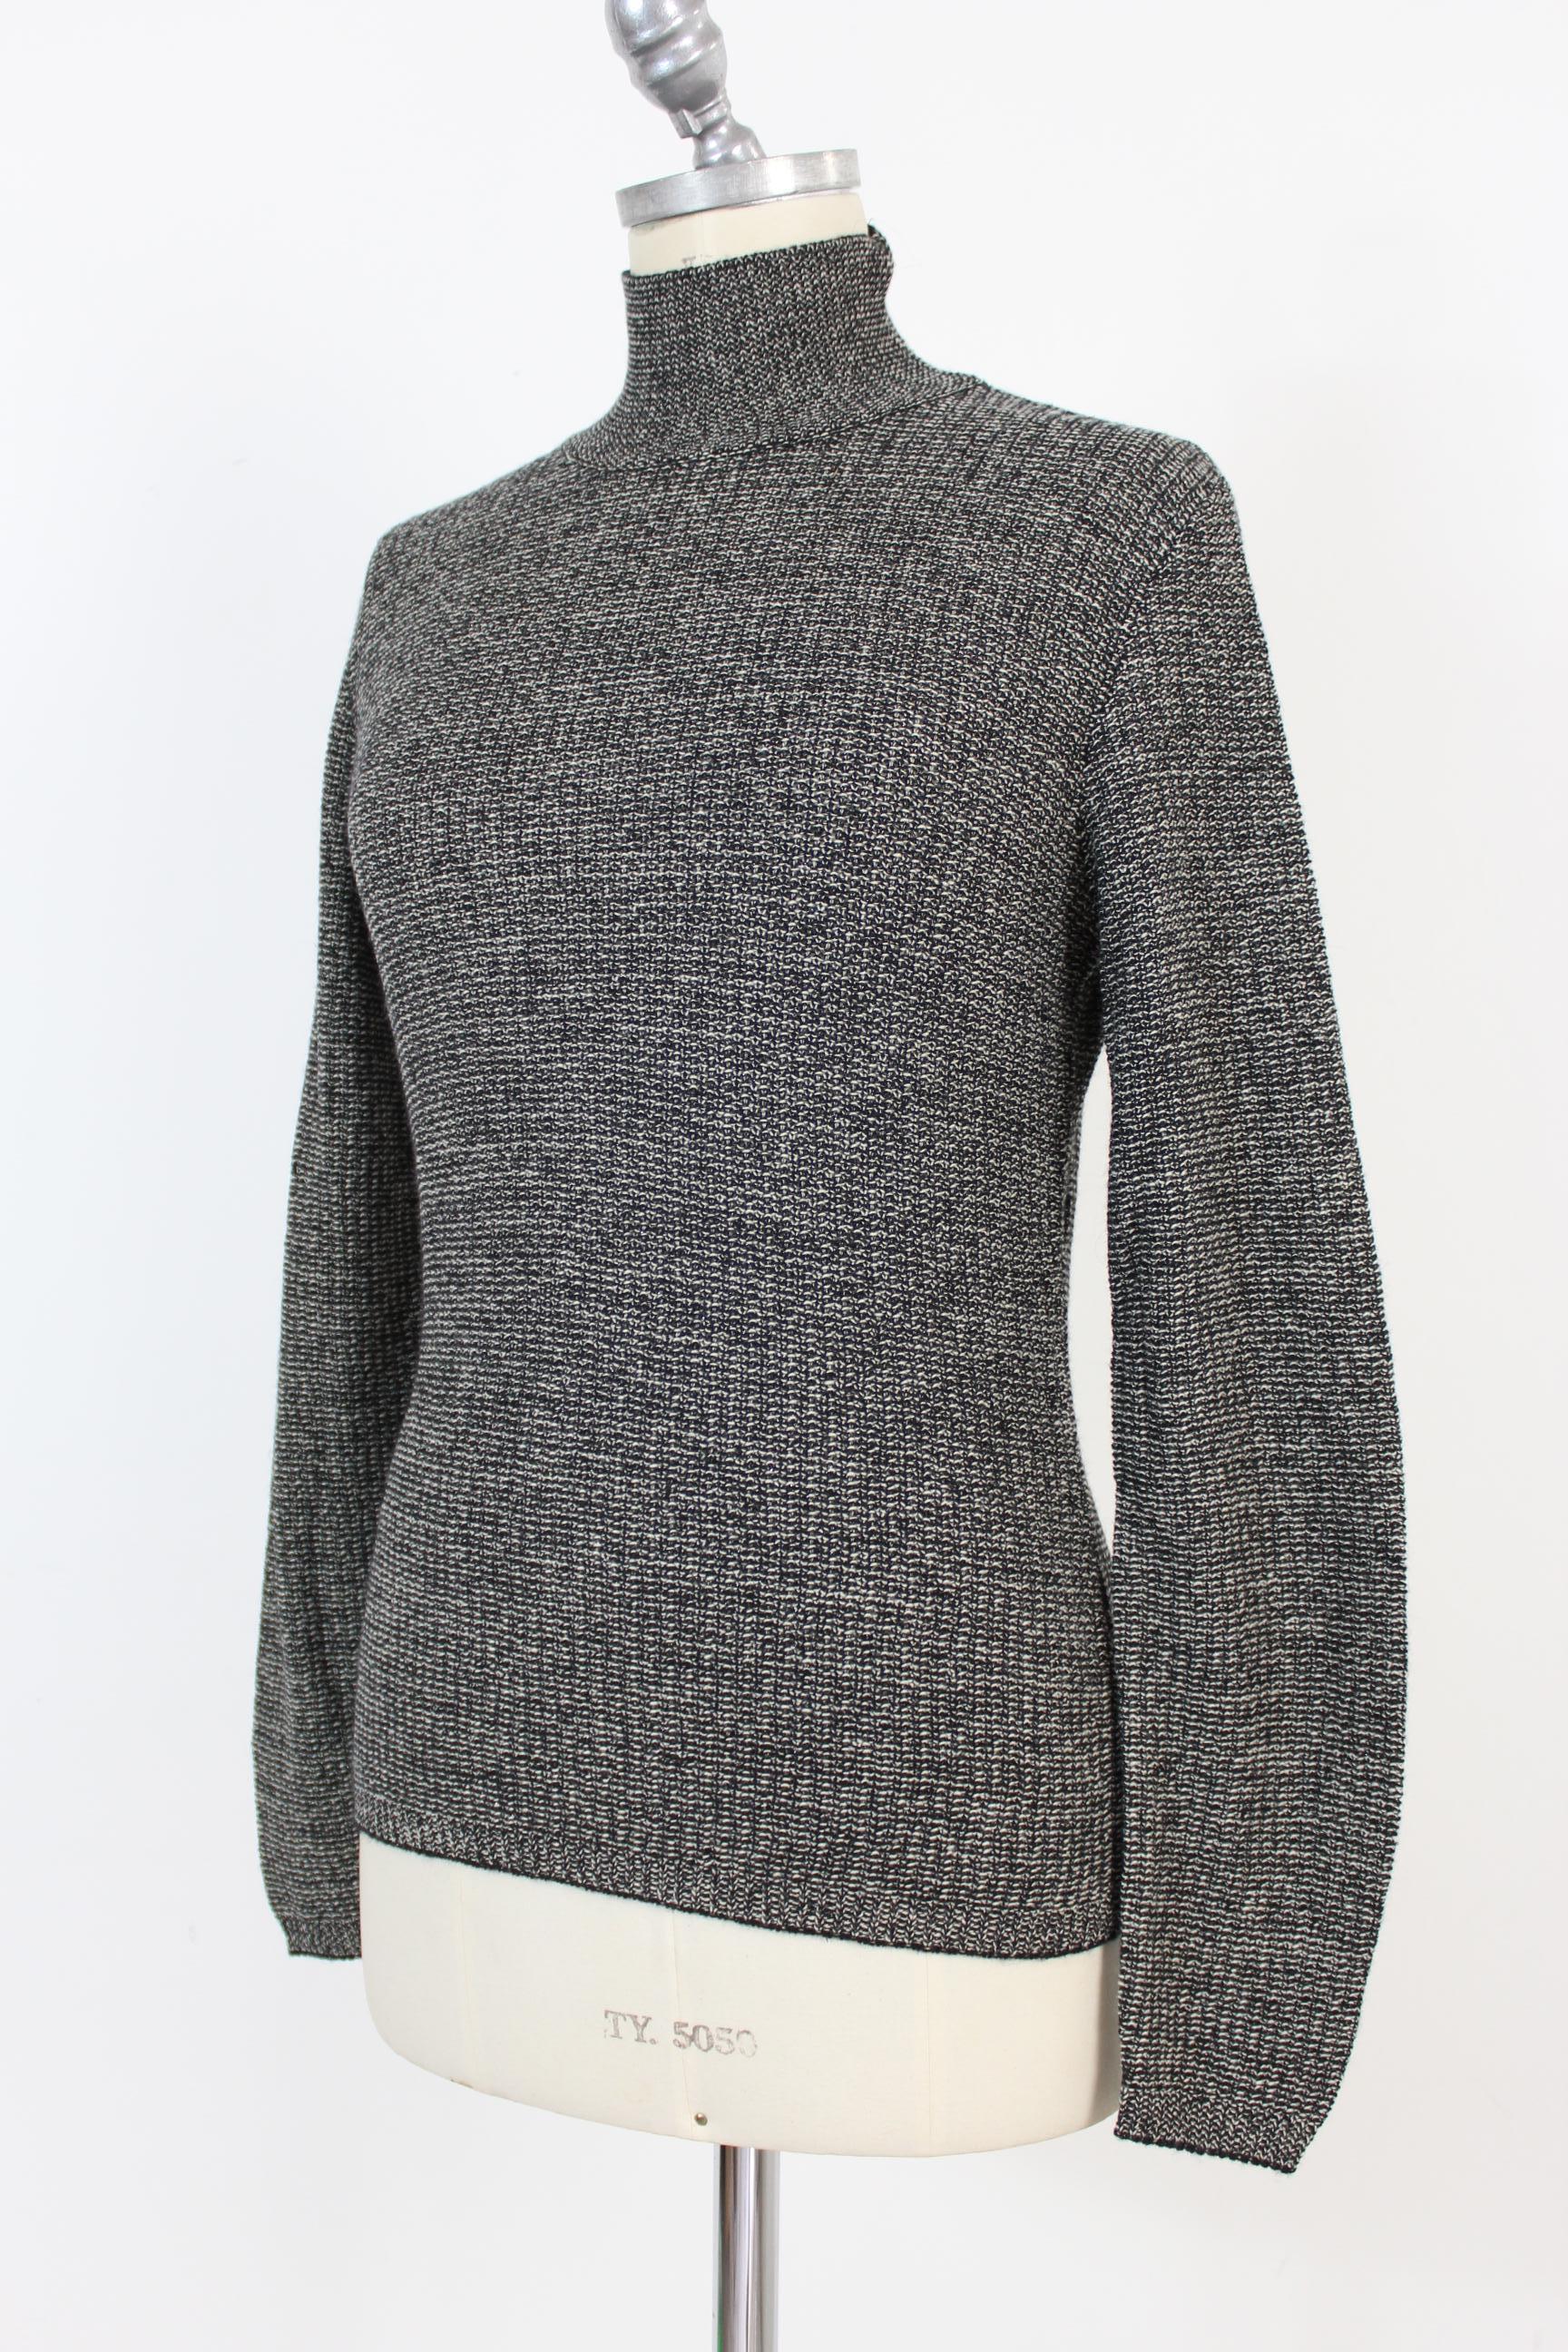 Genny by Gianni Versace Gray Salt Pepper Cashmere Turtleneck Sweater ...